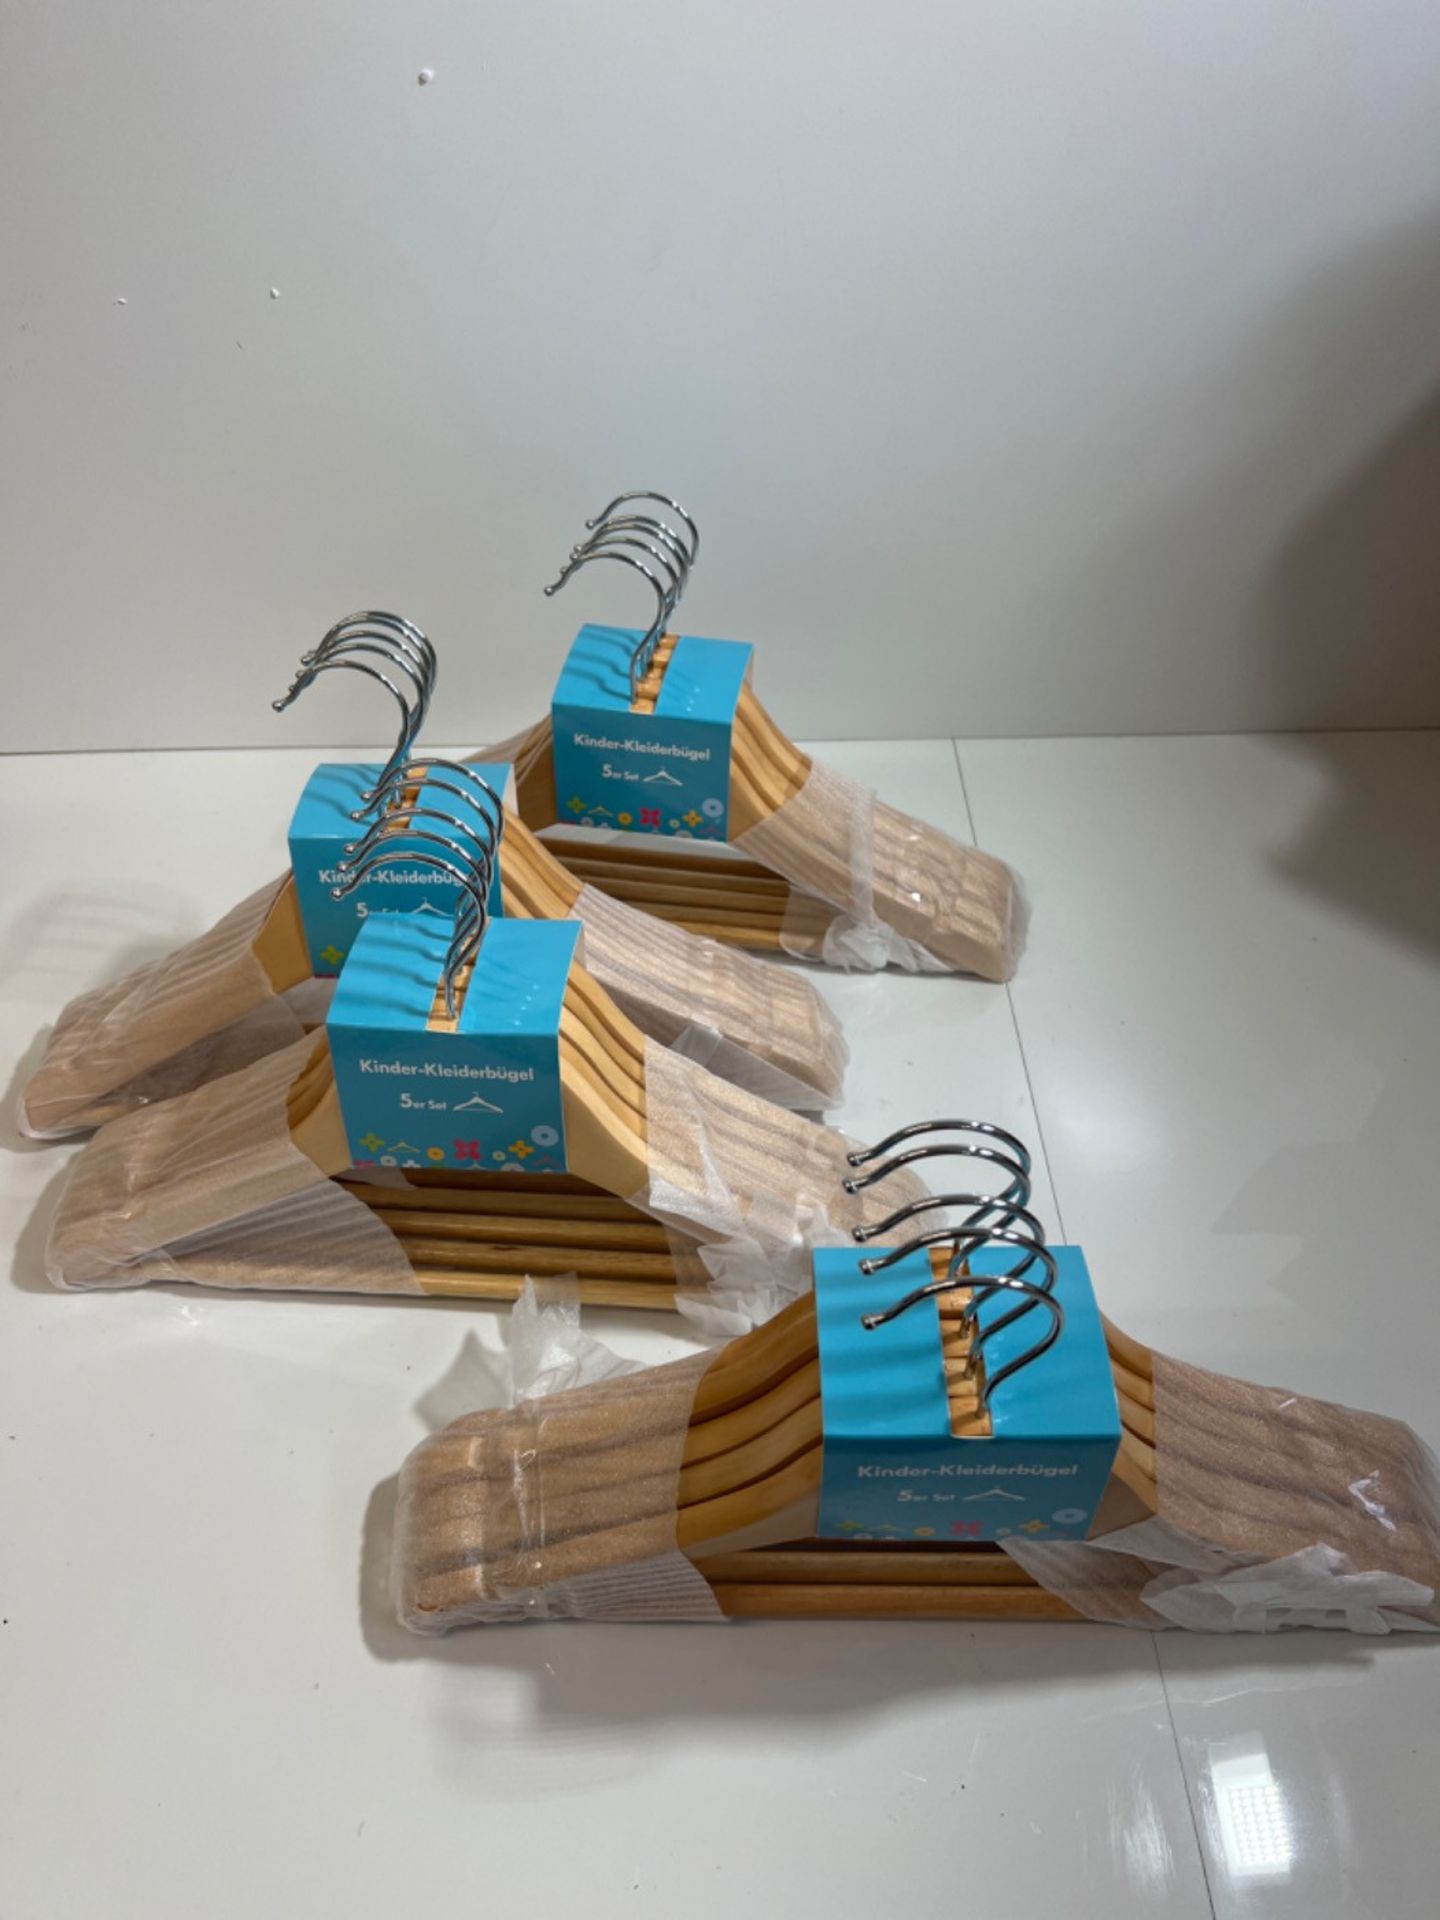 SONGMICS Wood Children’s Hangers, 20-Pack Kid’s Clothes Hangers, with Trousers Bar, Shoulder No - Image 3 of 3